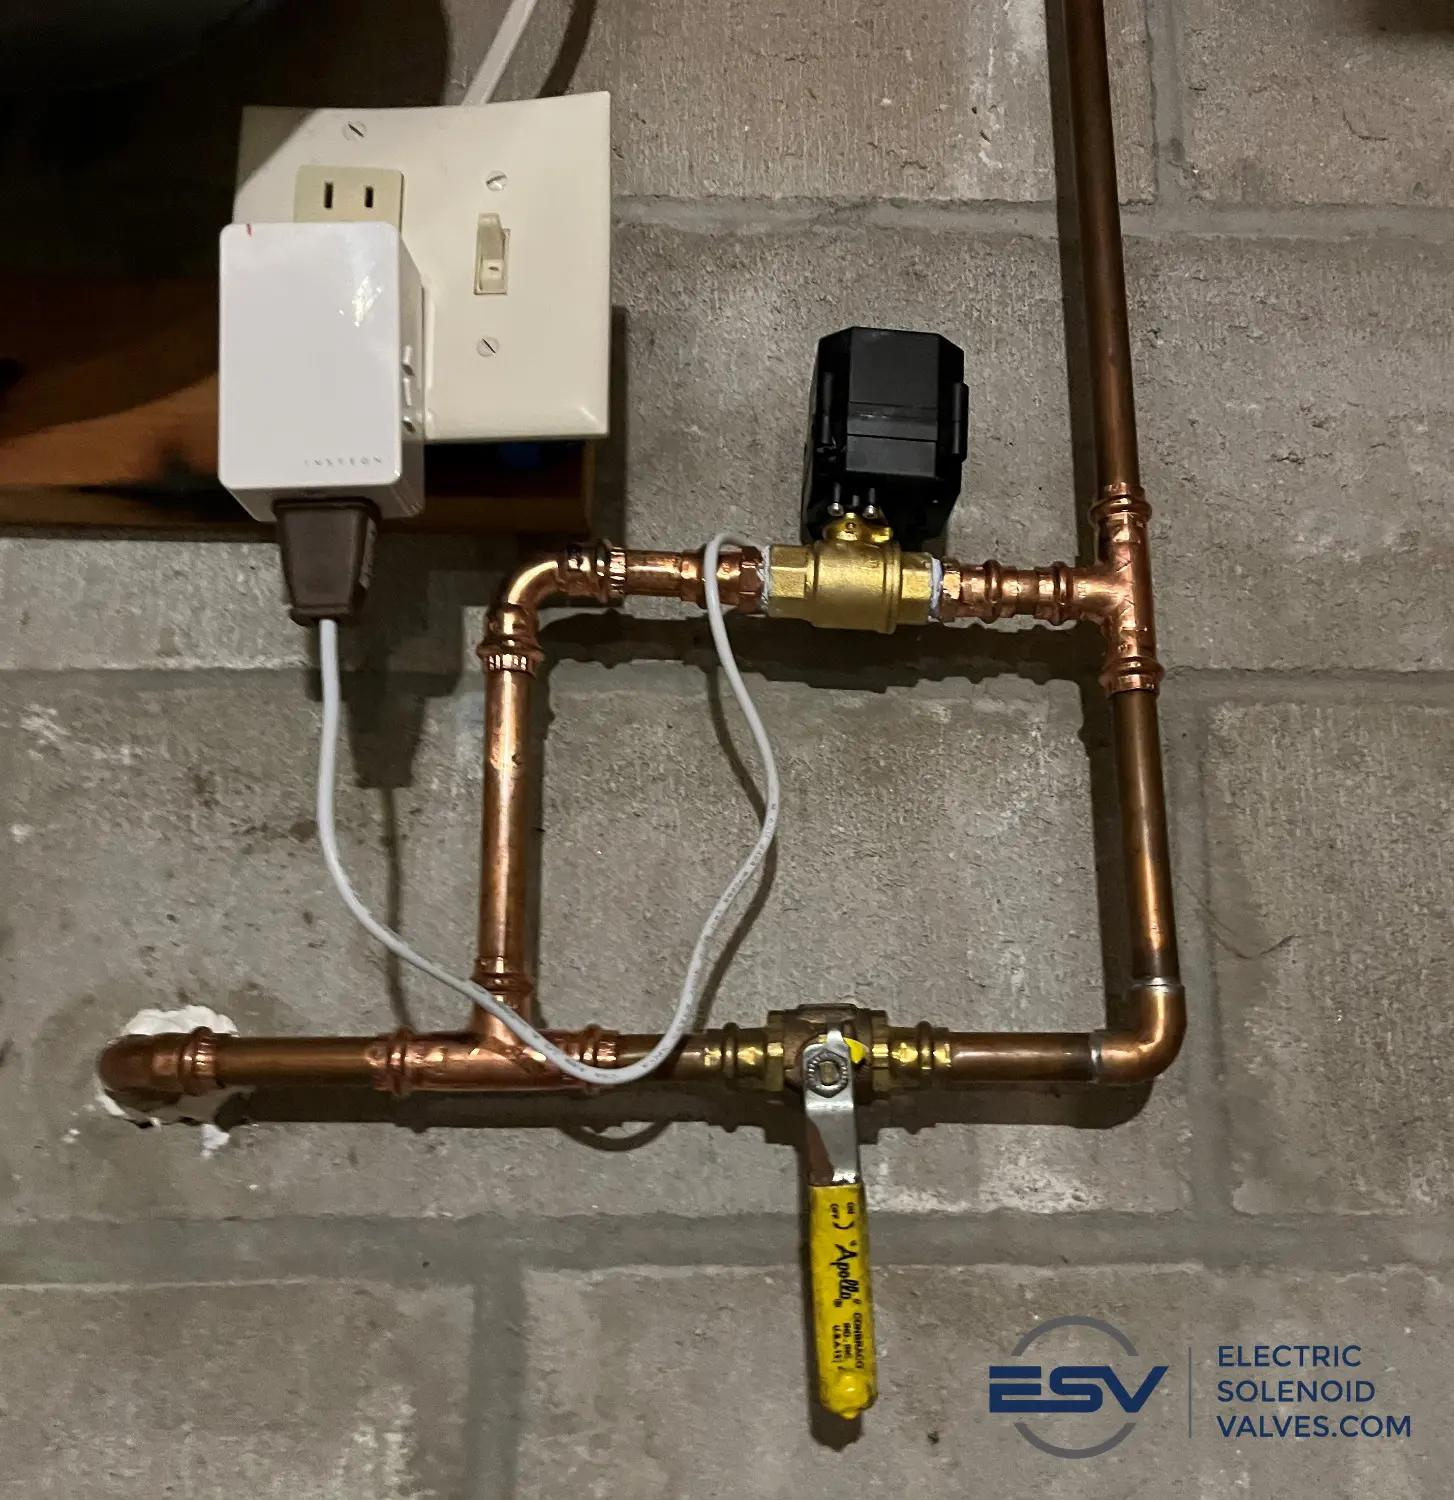 Customer photo of a 1/2" Brass Electric Ball Valve used to control an outdoor water faucet with Alexa